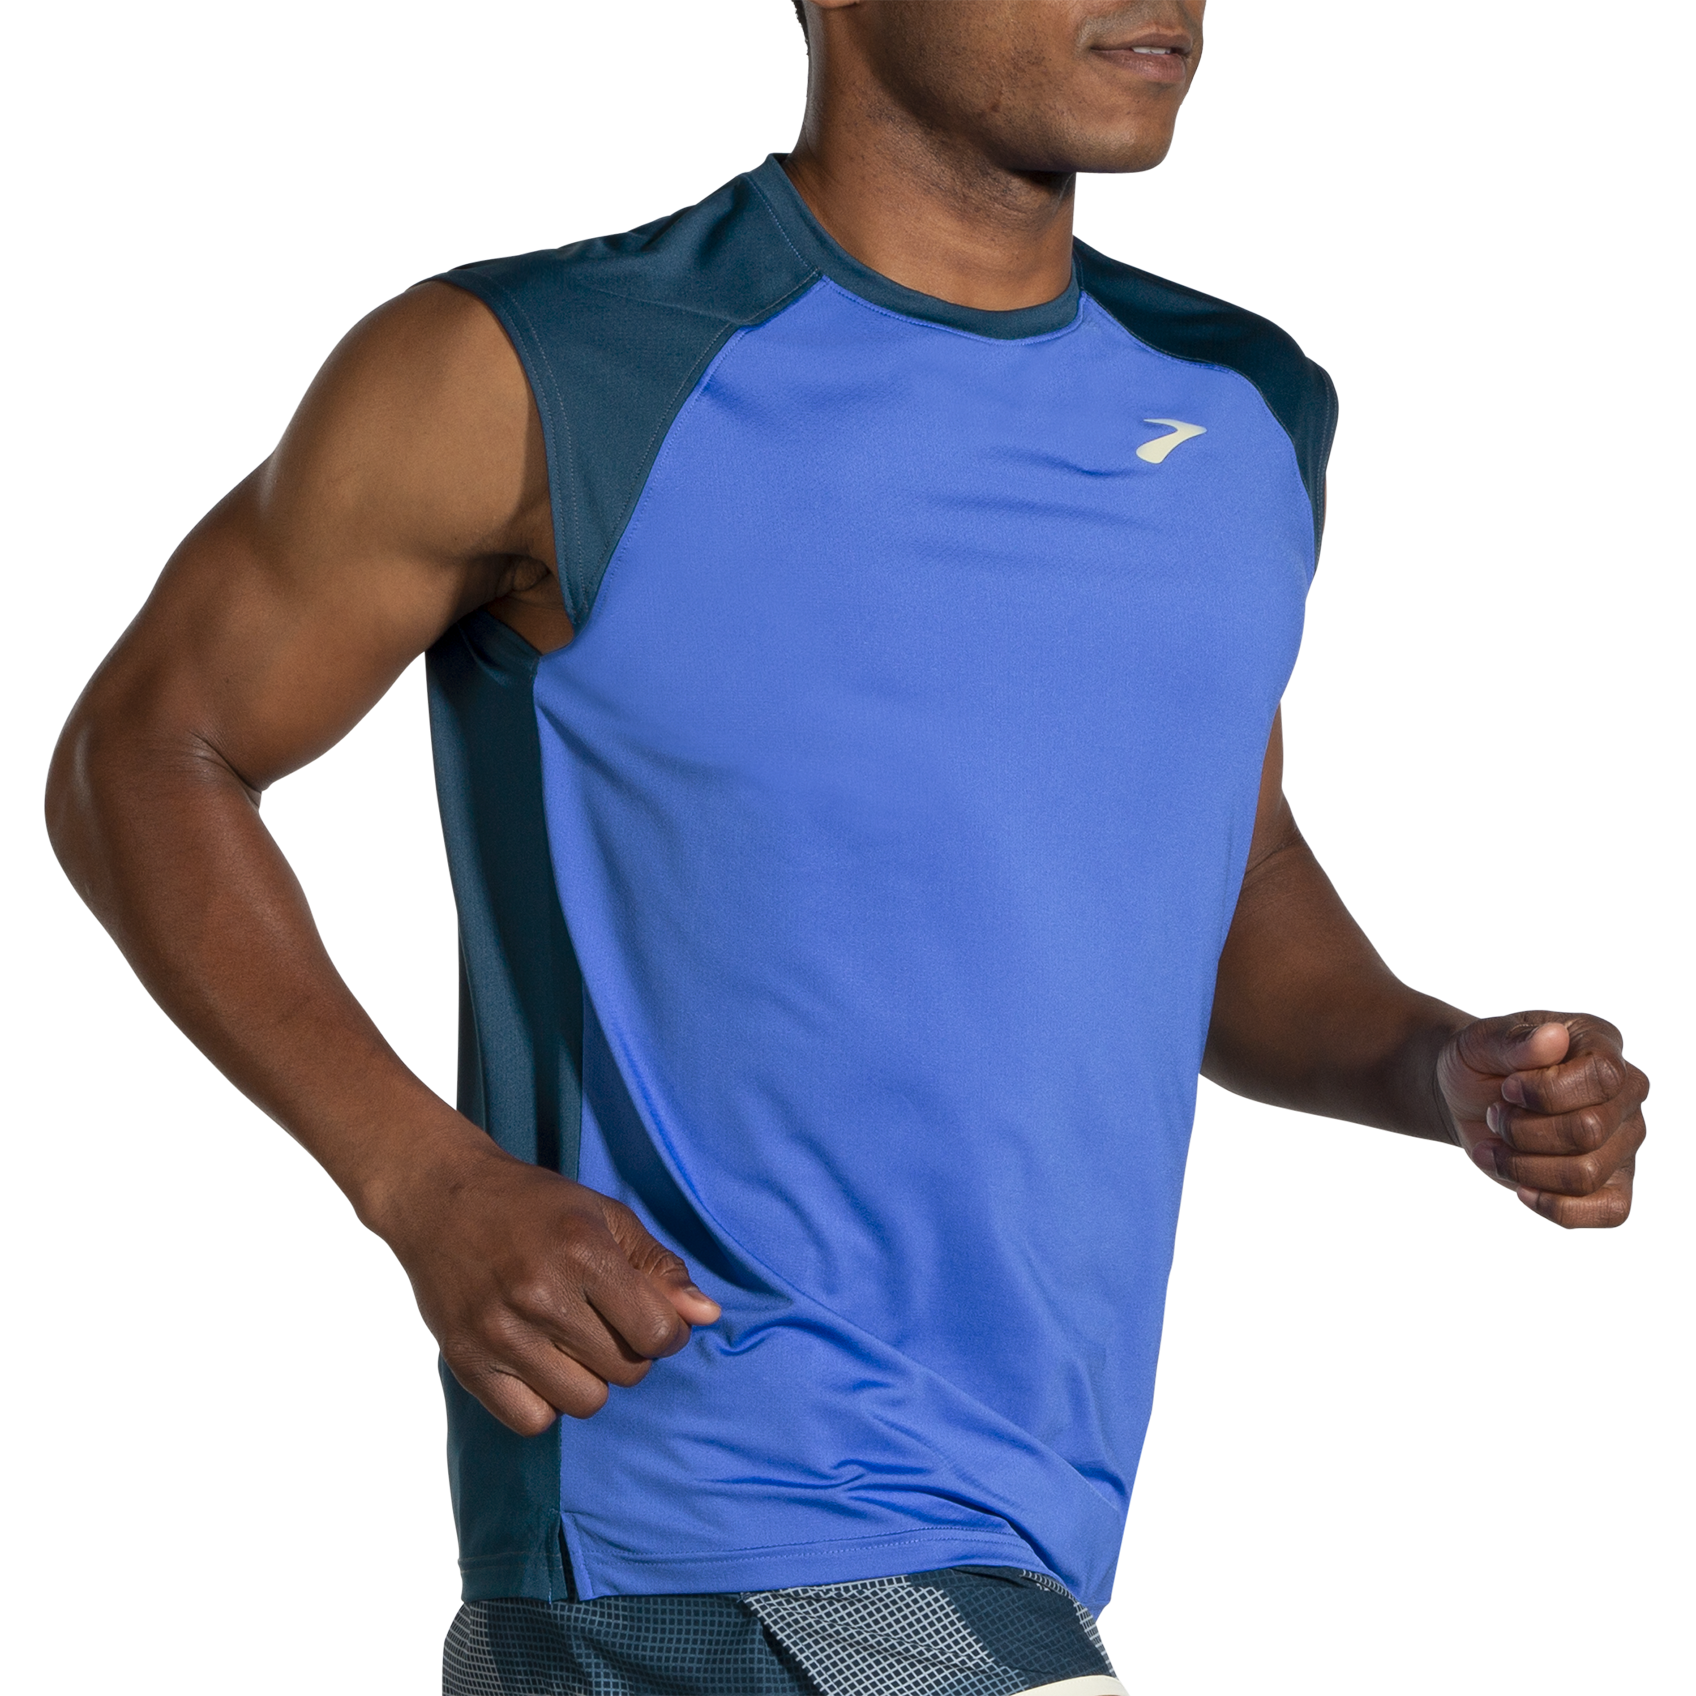 More Mile More-Tech Sleeveless Mens Running Top 